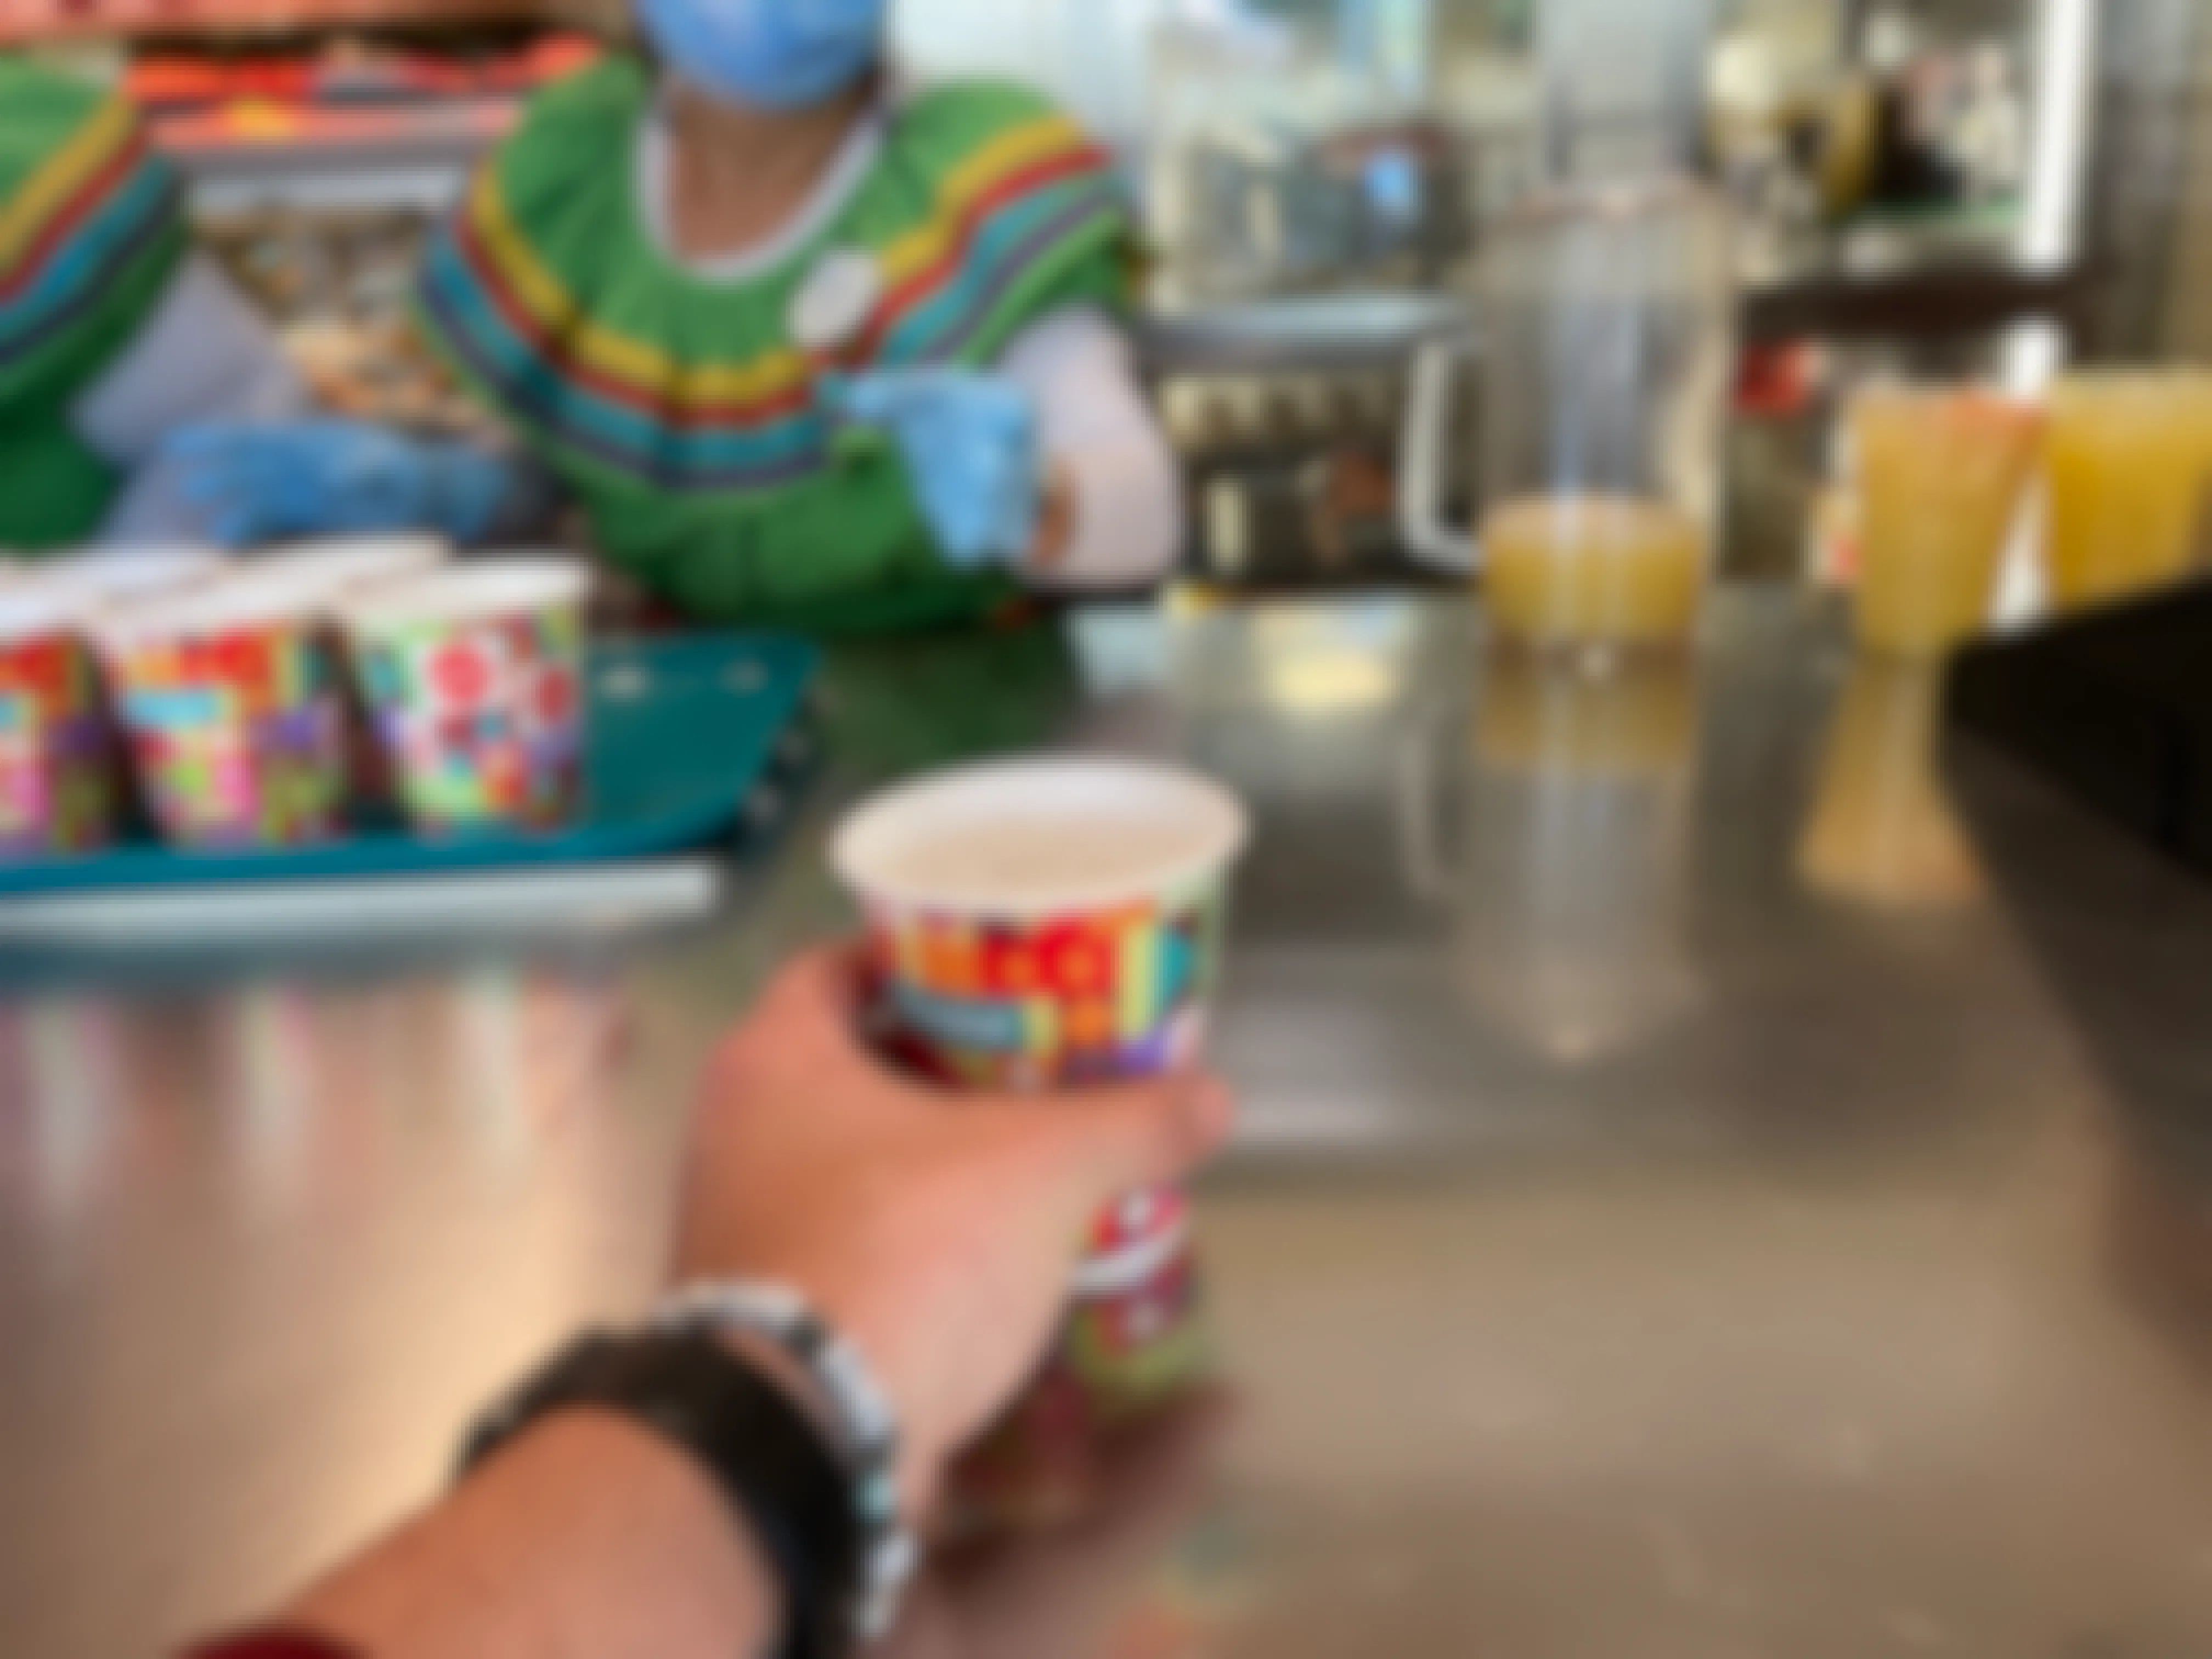 A person taking a free water cup from a counter inside a restaurant at Disneyland.